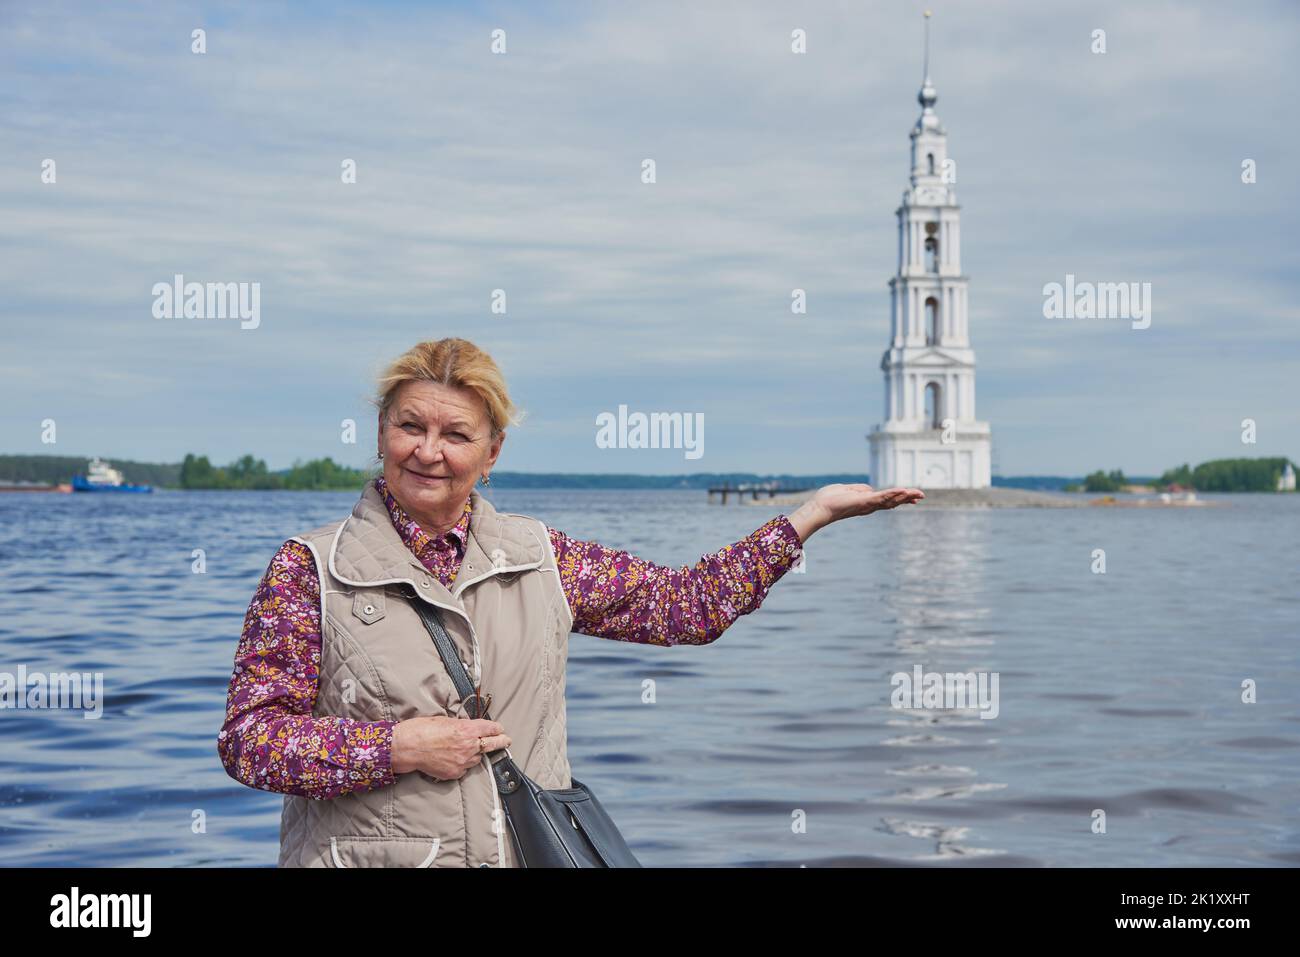 An elderly tourist poses against the background of the bell tower and pretends to hold the tower in the palm of her hand.  Stock Photo